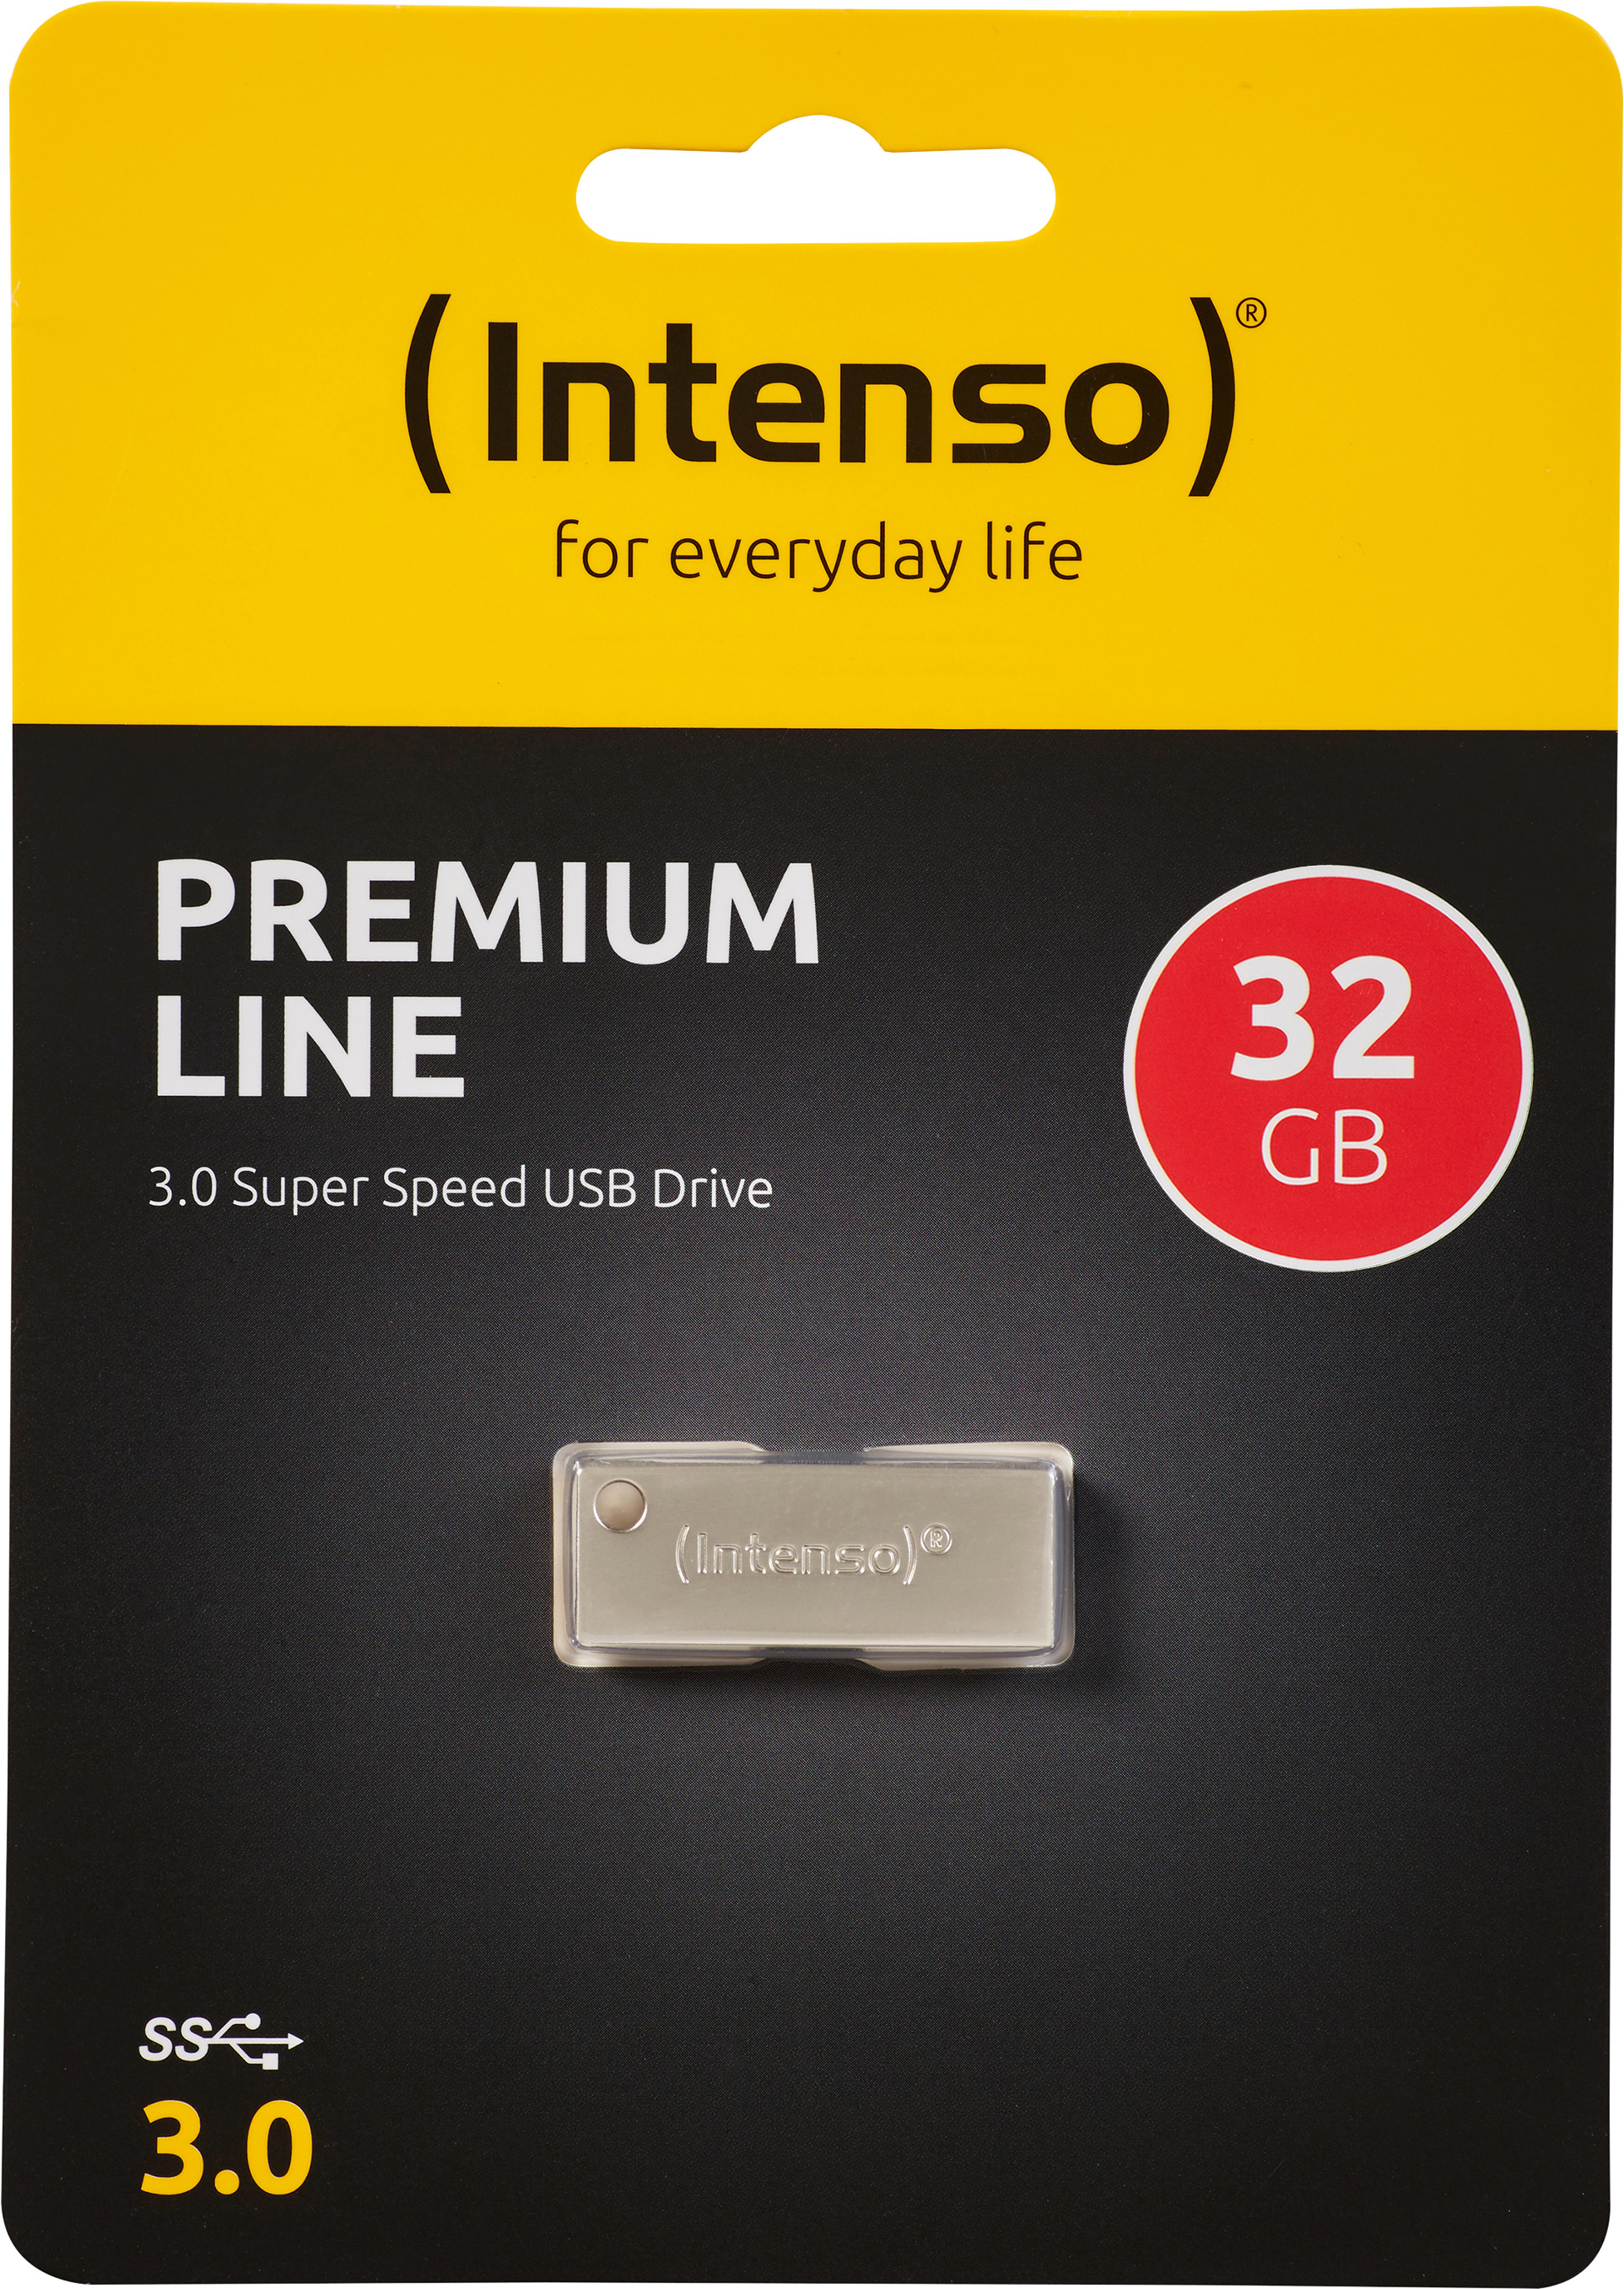 Intenso USB 3.0 Stick 32GB, Premium Line, Metall, silber Typ-A, (R) 100MB/s, Retail-Blister